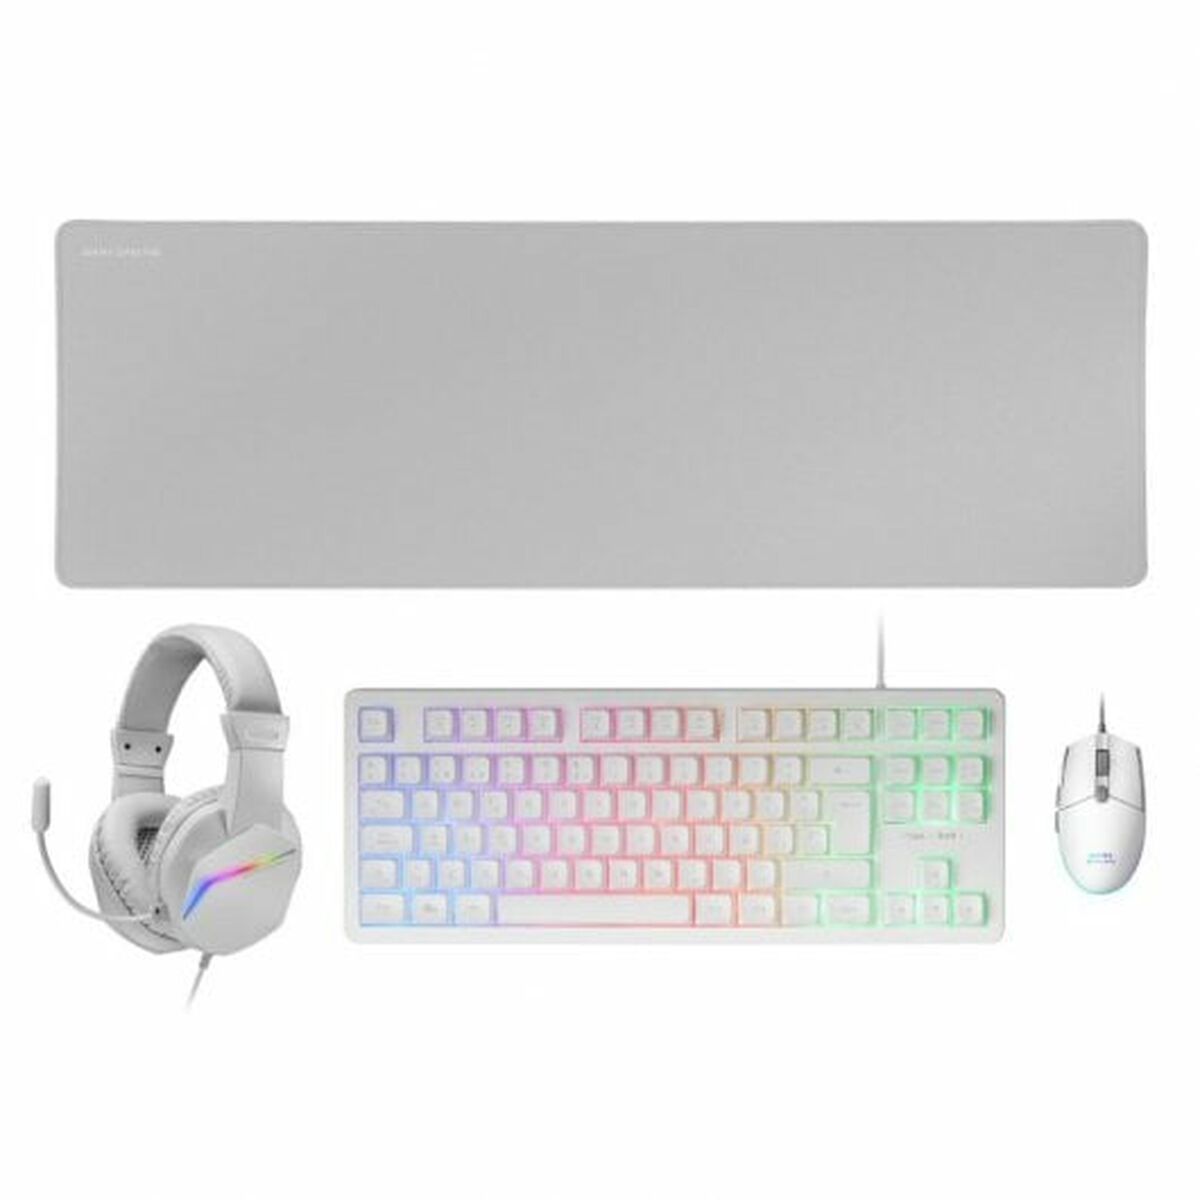 Keyboard and Mouse Mars Gaming MCPRGB3WES White QWERTY, Mars Gaming, Computing, Accessories, keyboard-and-mouse-mars-gaming-mcprgb3wes-white-qwerty, Brand_Mars Gaming, category-reference-2609, category-reference-2642, category-reference-2646, category-reference-t-19685, category-reference-t-19908, category-reference-t-21353, category-reference-t-25628, computers / peripherals, Condition_NEW, office, Price_50 - 100, Teleworking, RiotNook